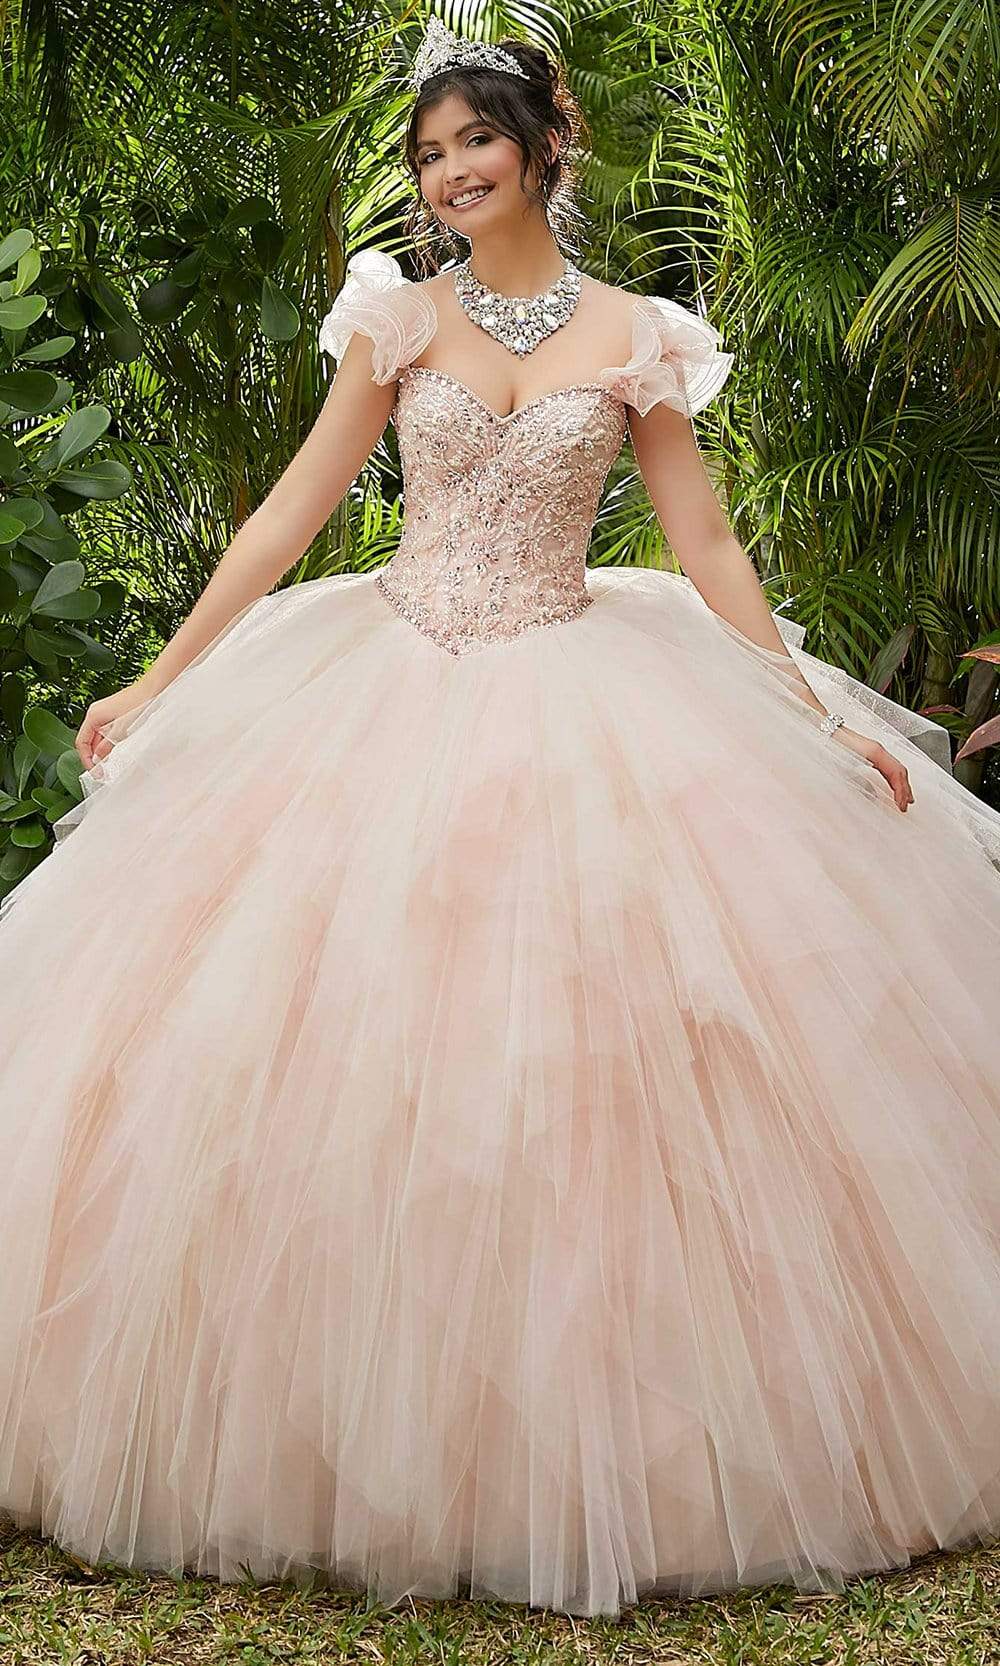 Vizcaya by Mori Lee - 89283 Embroidered Sweetheart Sparkle Tulle Ballgown
